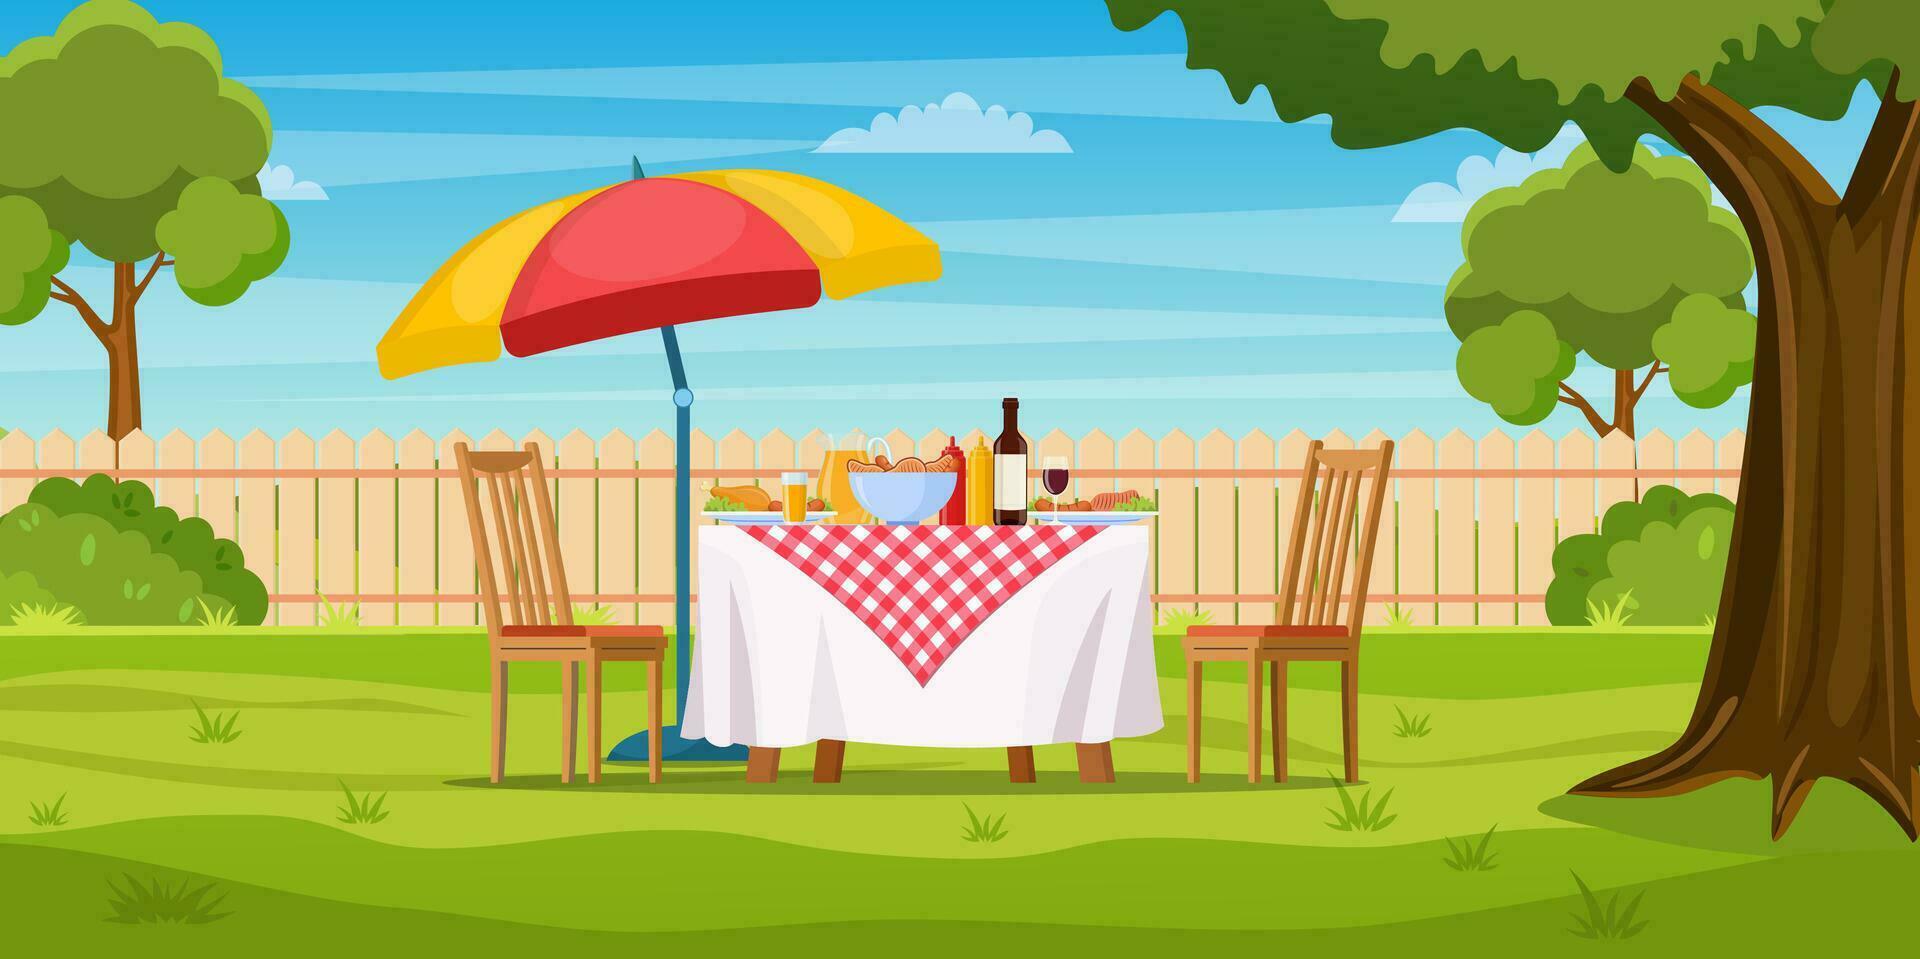 Barbecue party in the backyard with fence, trees, bushes. picnic with barbecue on summer lawn in park or garden food on table, chairs and umbrella. vector illustration in flat design